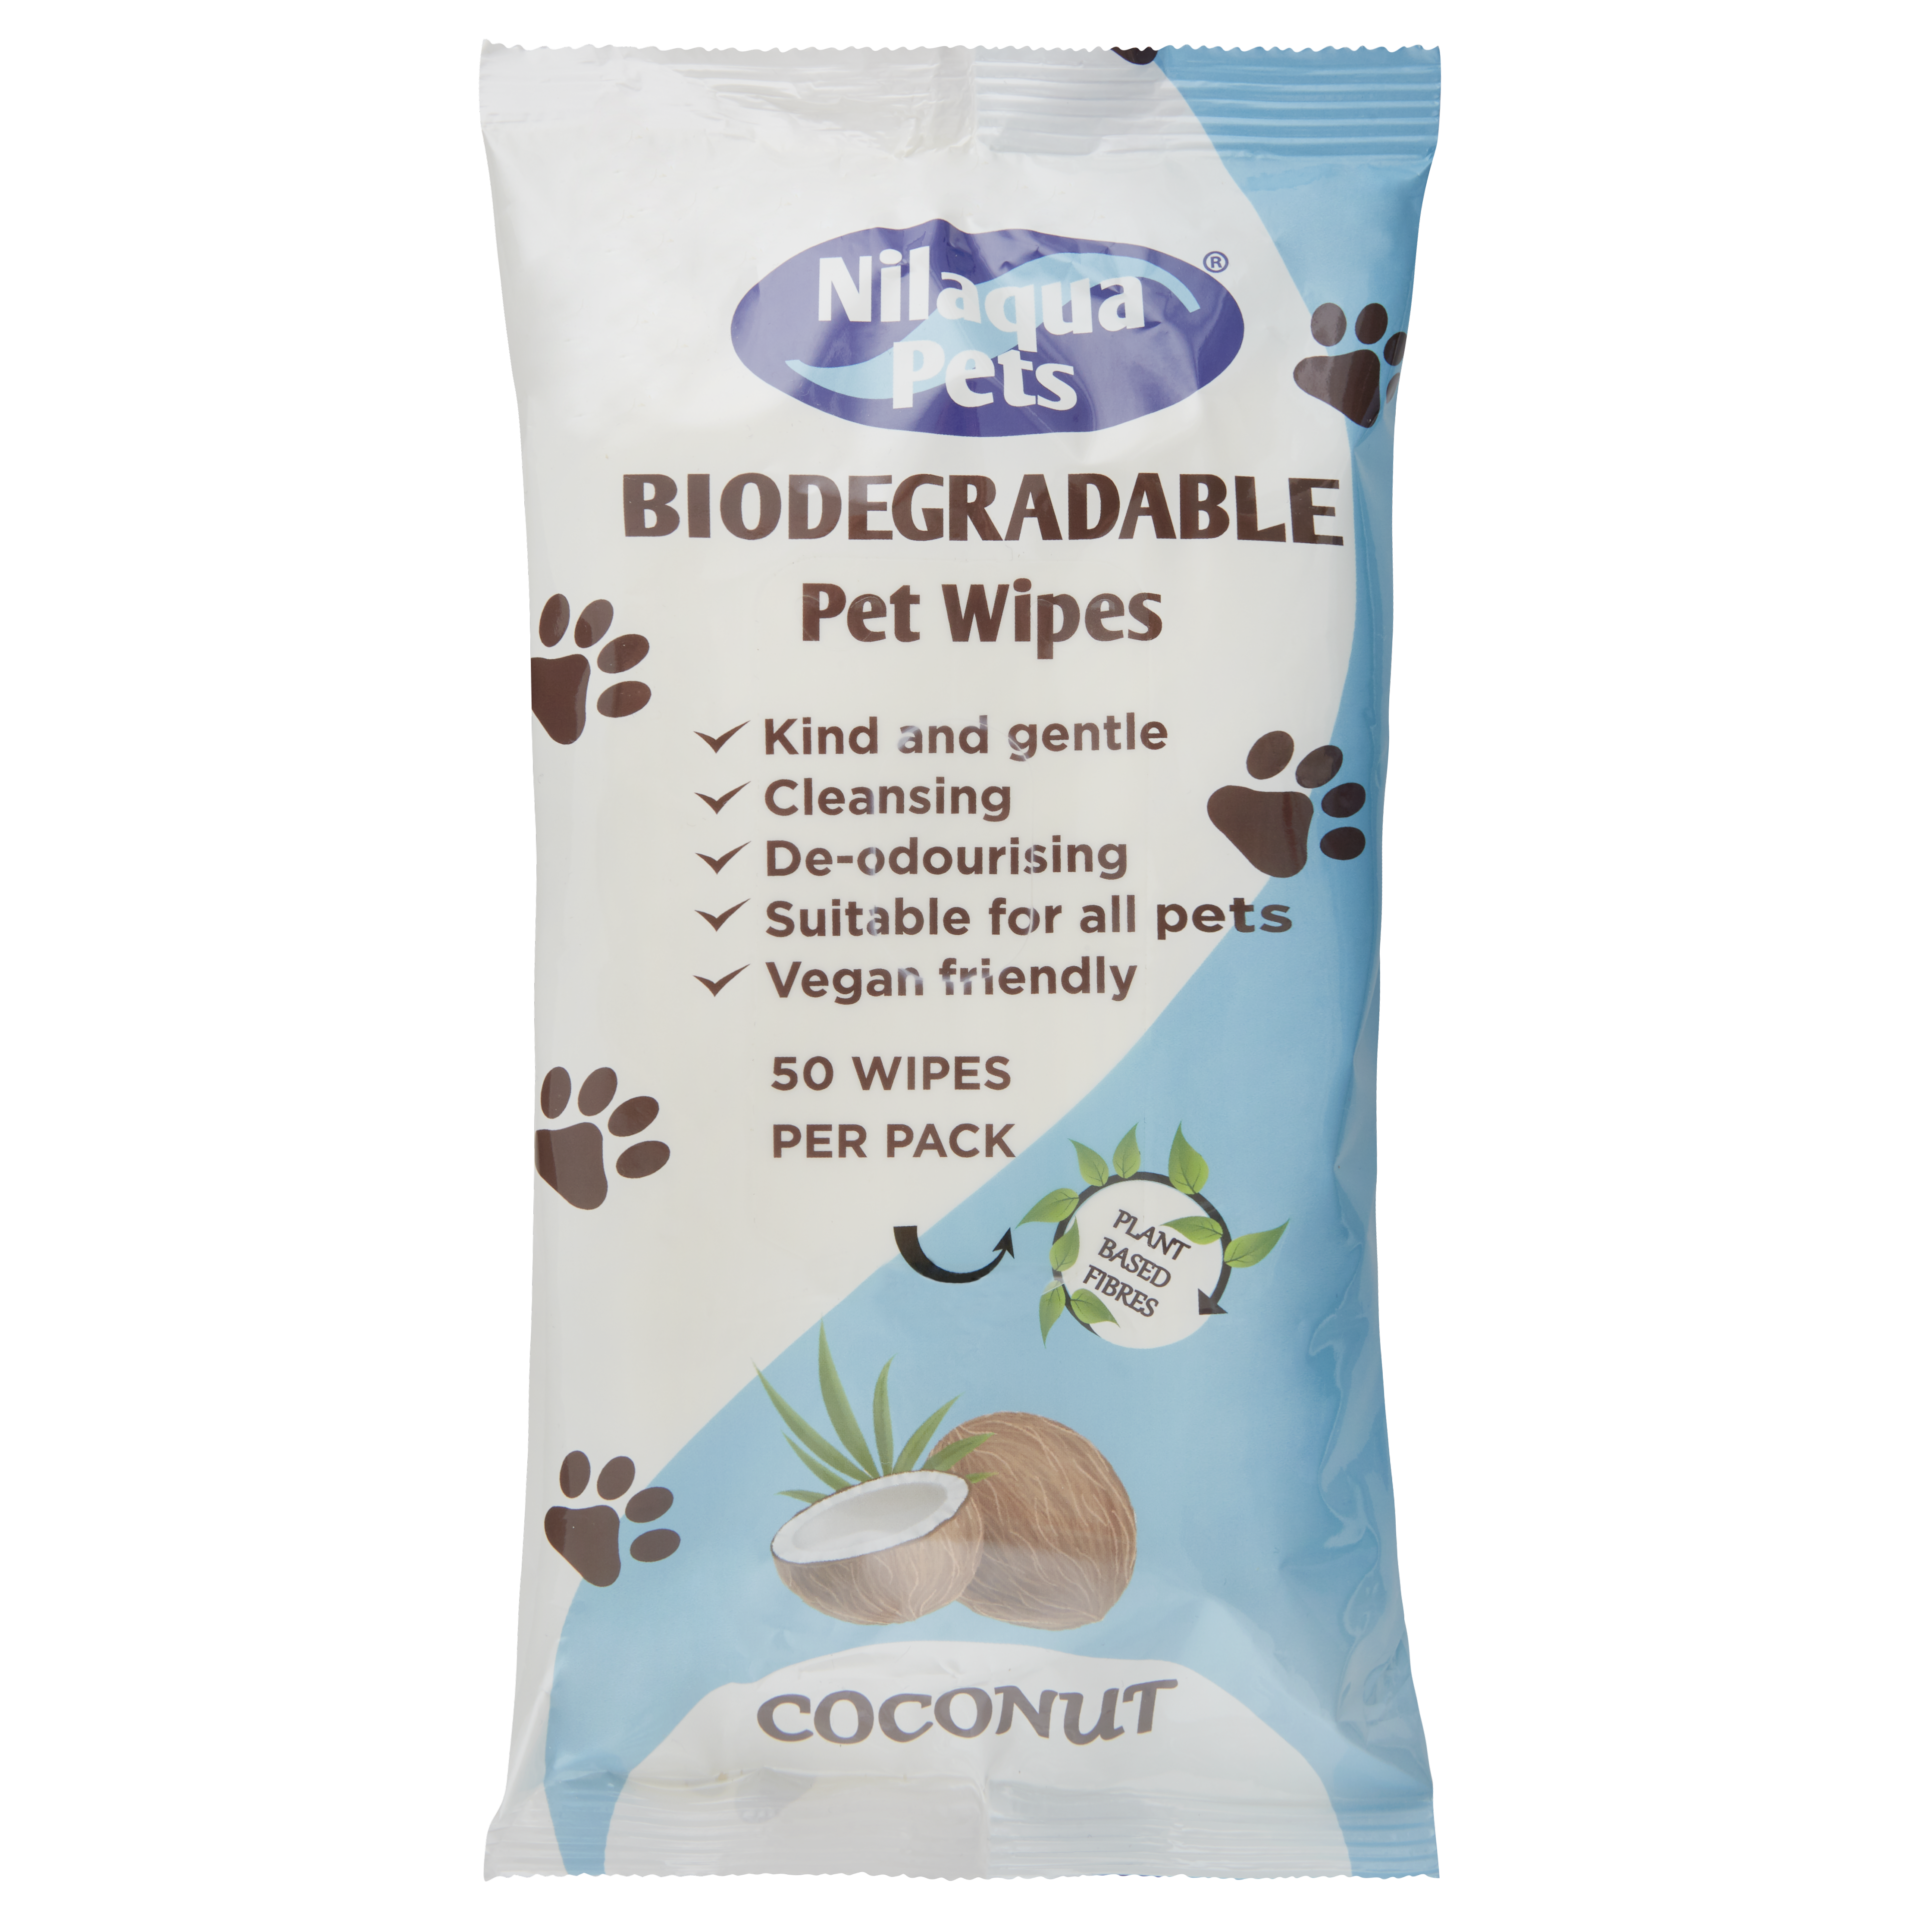 Biodegradable Pet Wipes 50 pack in coconut.